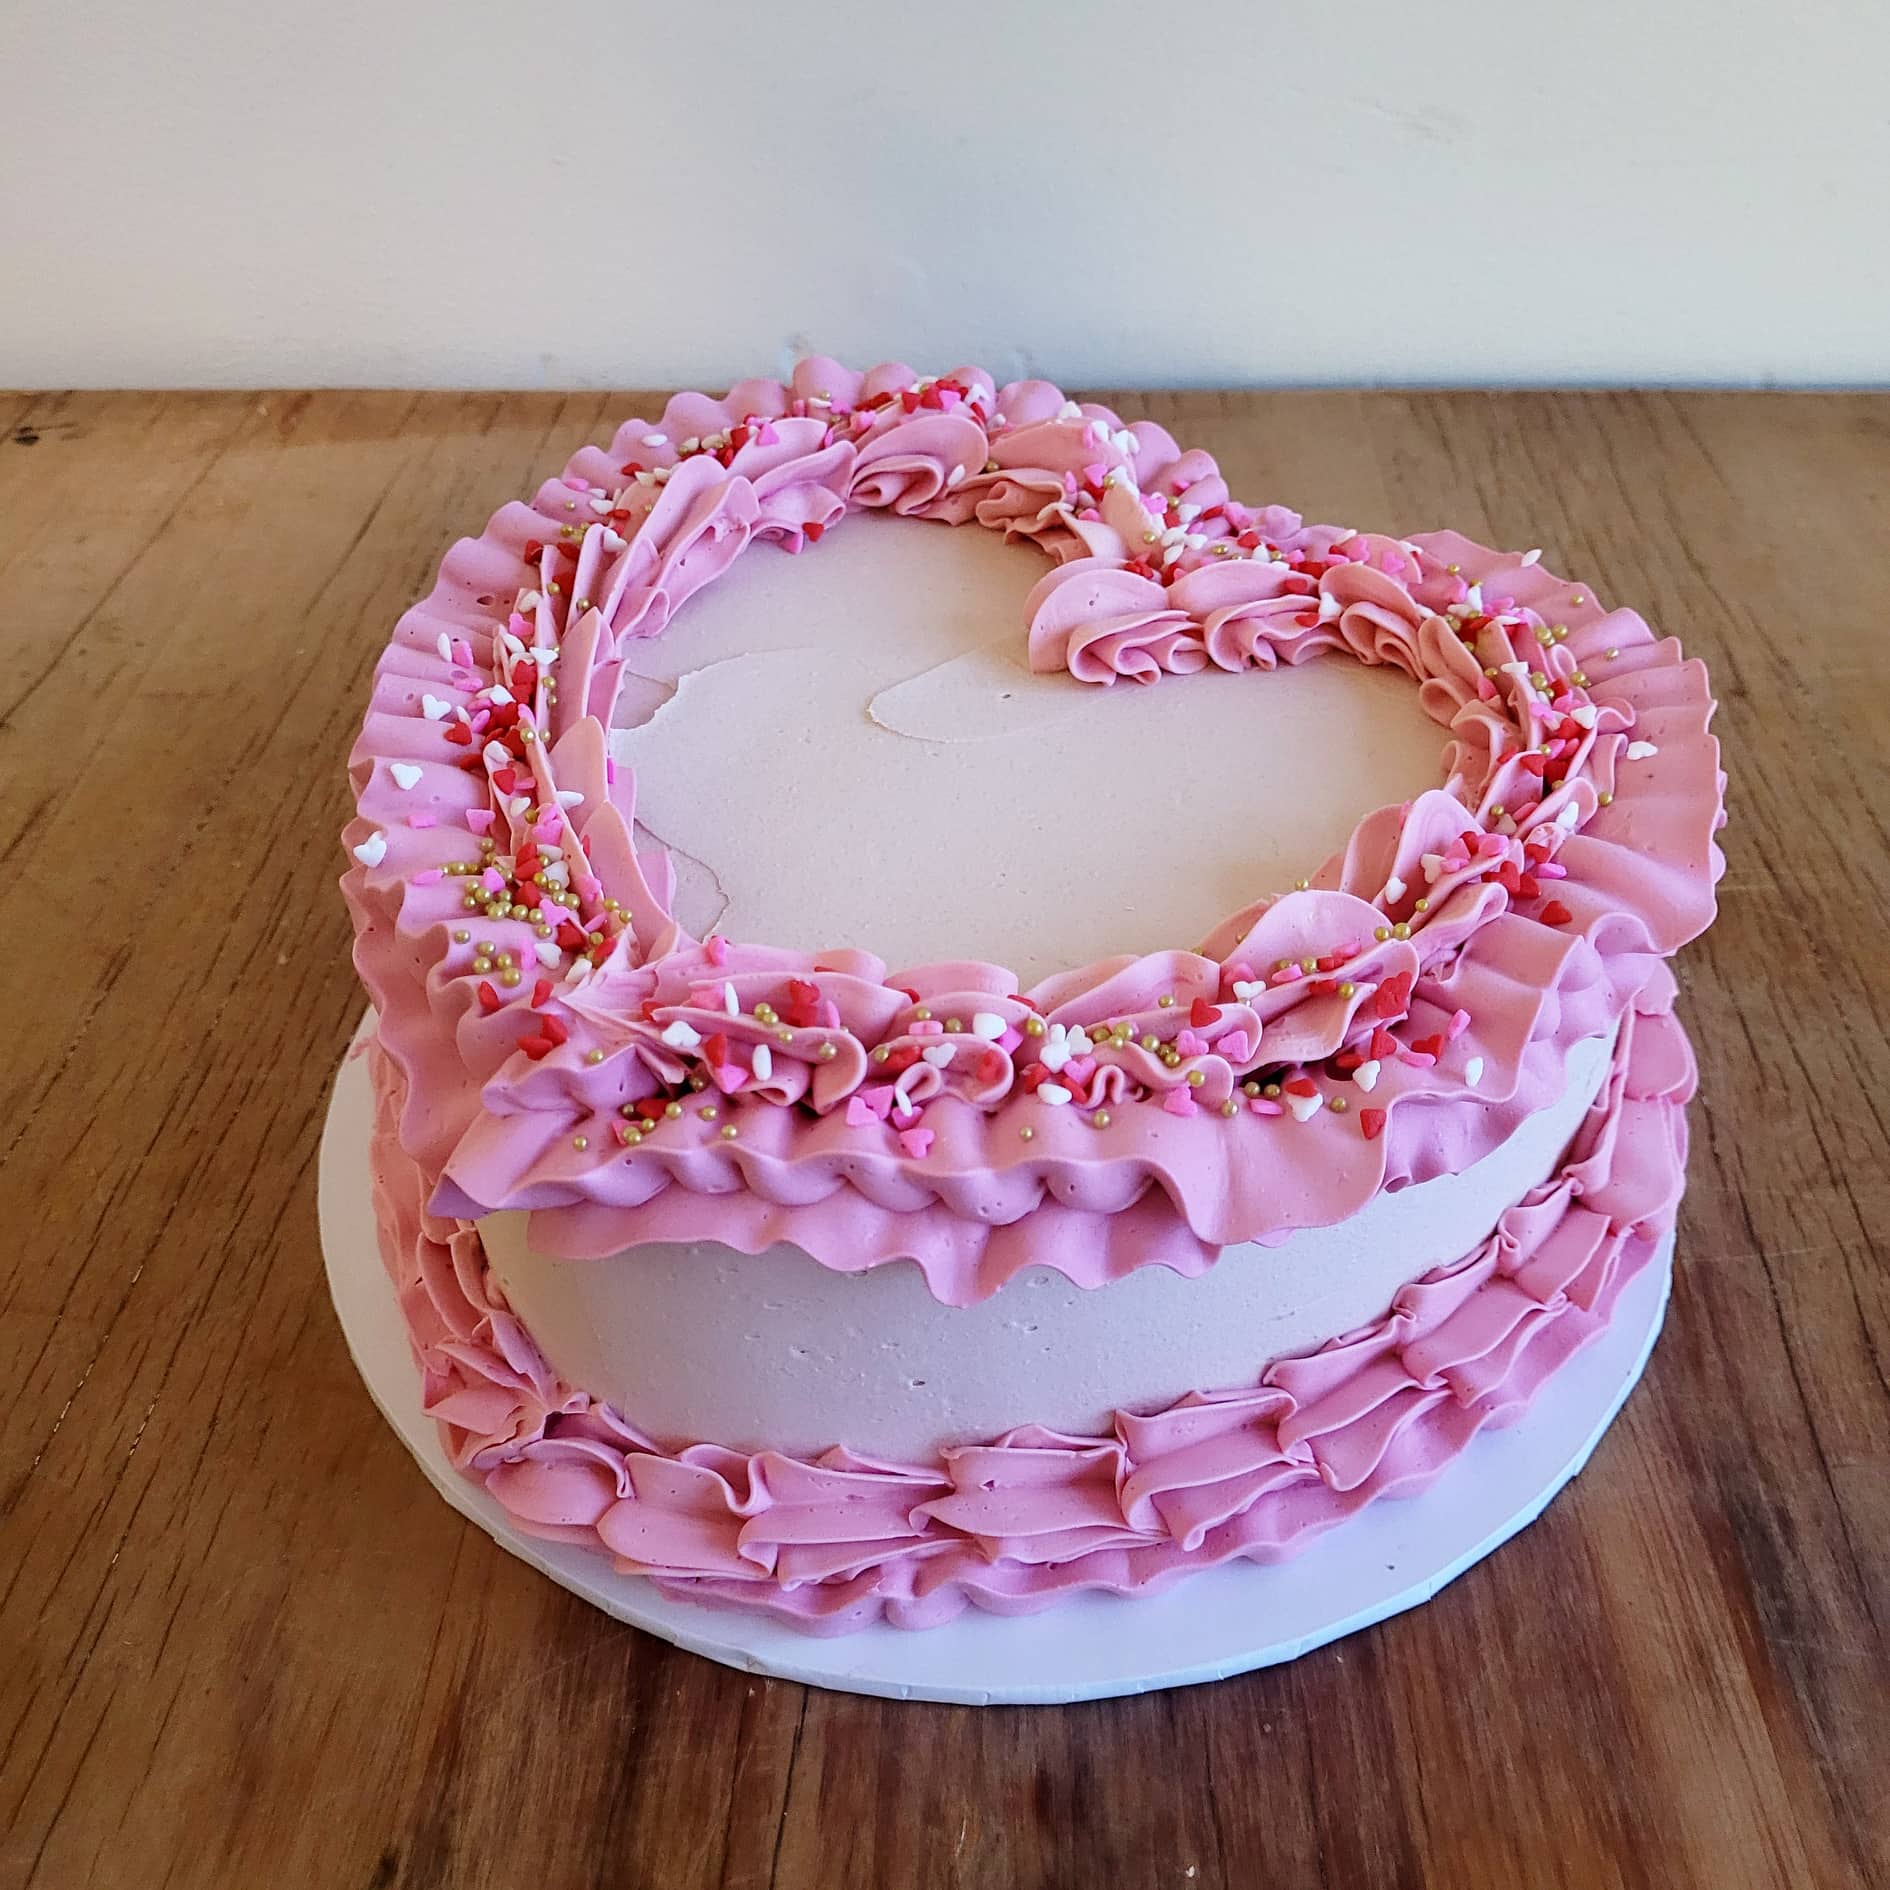 Heart Cake - Parsley and Icing